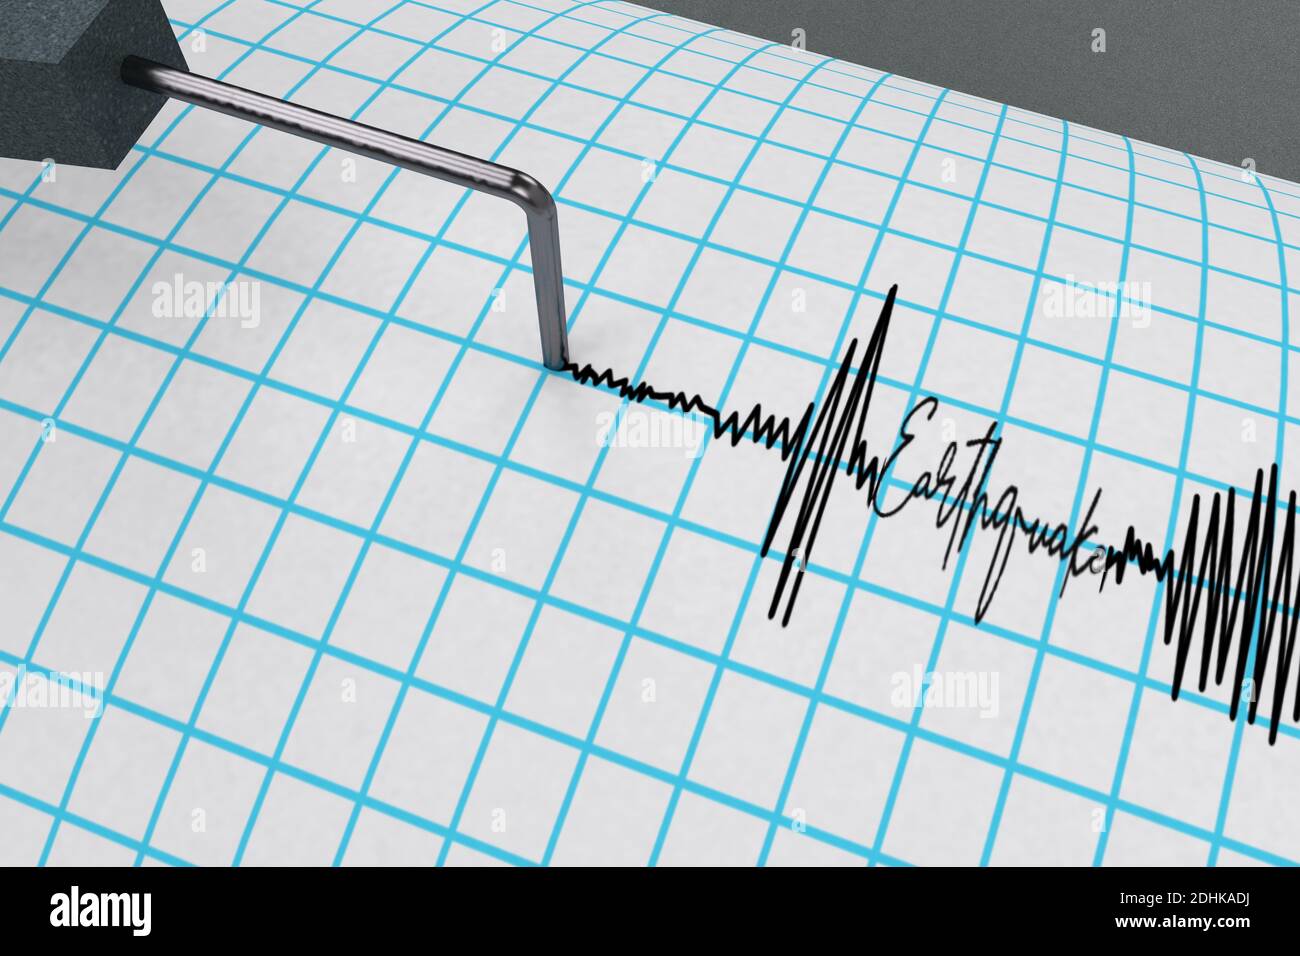 Seismograph tracing the curve that indicates seismic activity pen record the waves on the drum with word earthquake 3D RENDER. Stock Photo